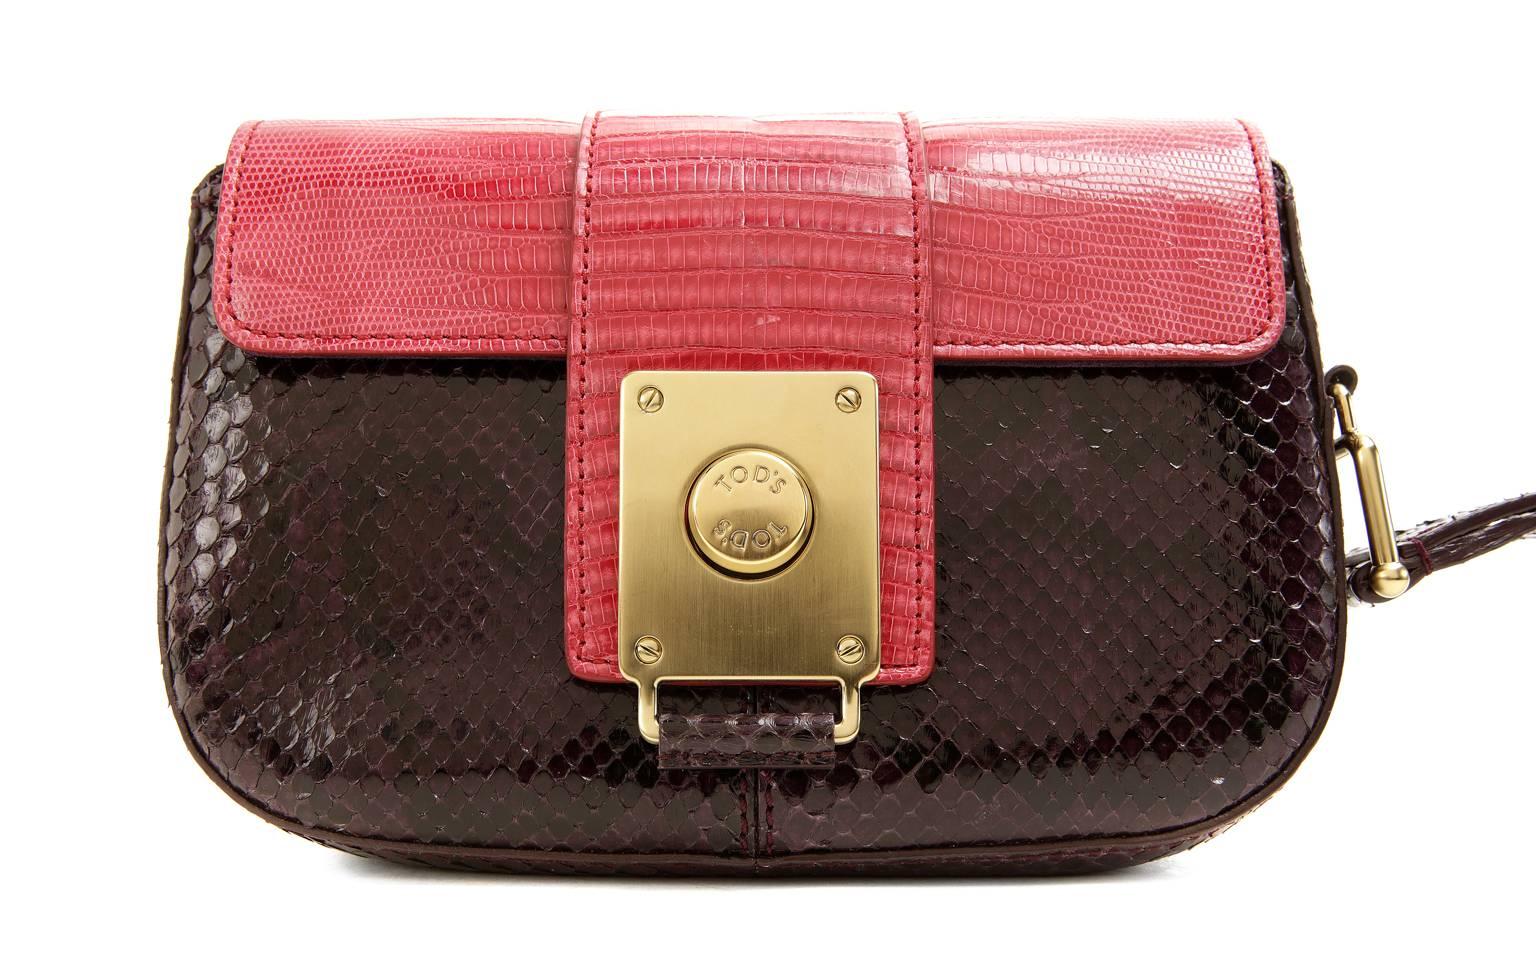 Tod’s Purple Python and Red Lizard Wristlet- PRISTINE;  appears never carried
 A fantastic find for exotic lovers, this petite piece combines python and lizard skin in of- the-moment color blocked fashion. 
 
Deep purple python base has a red